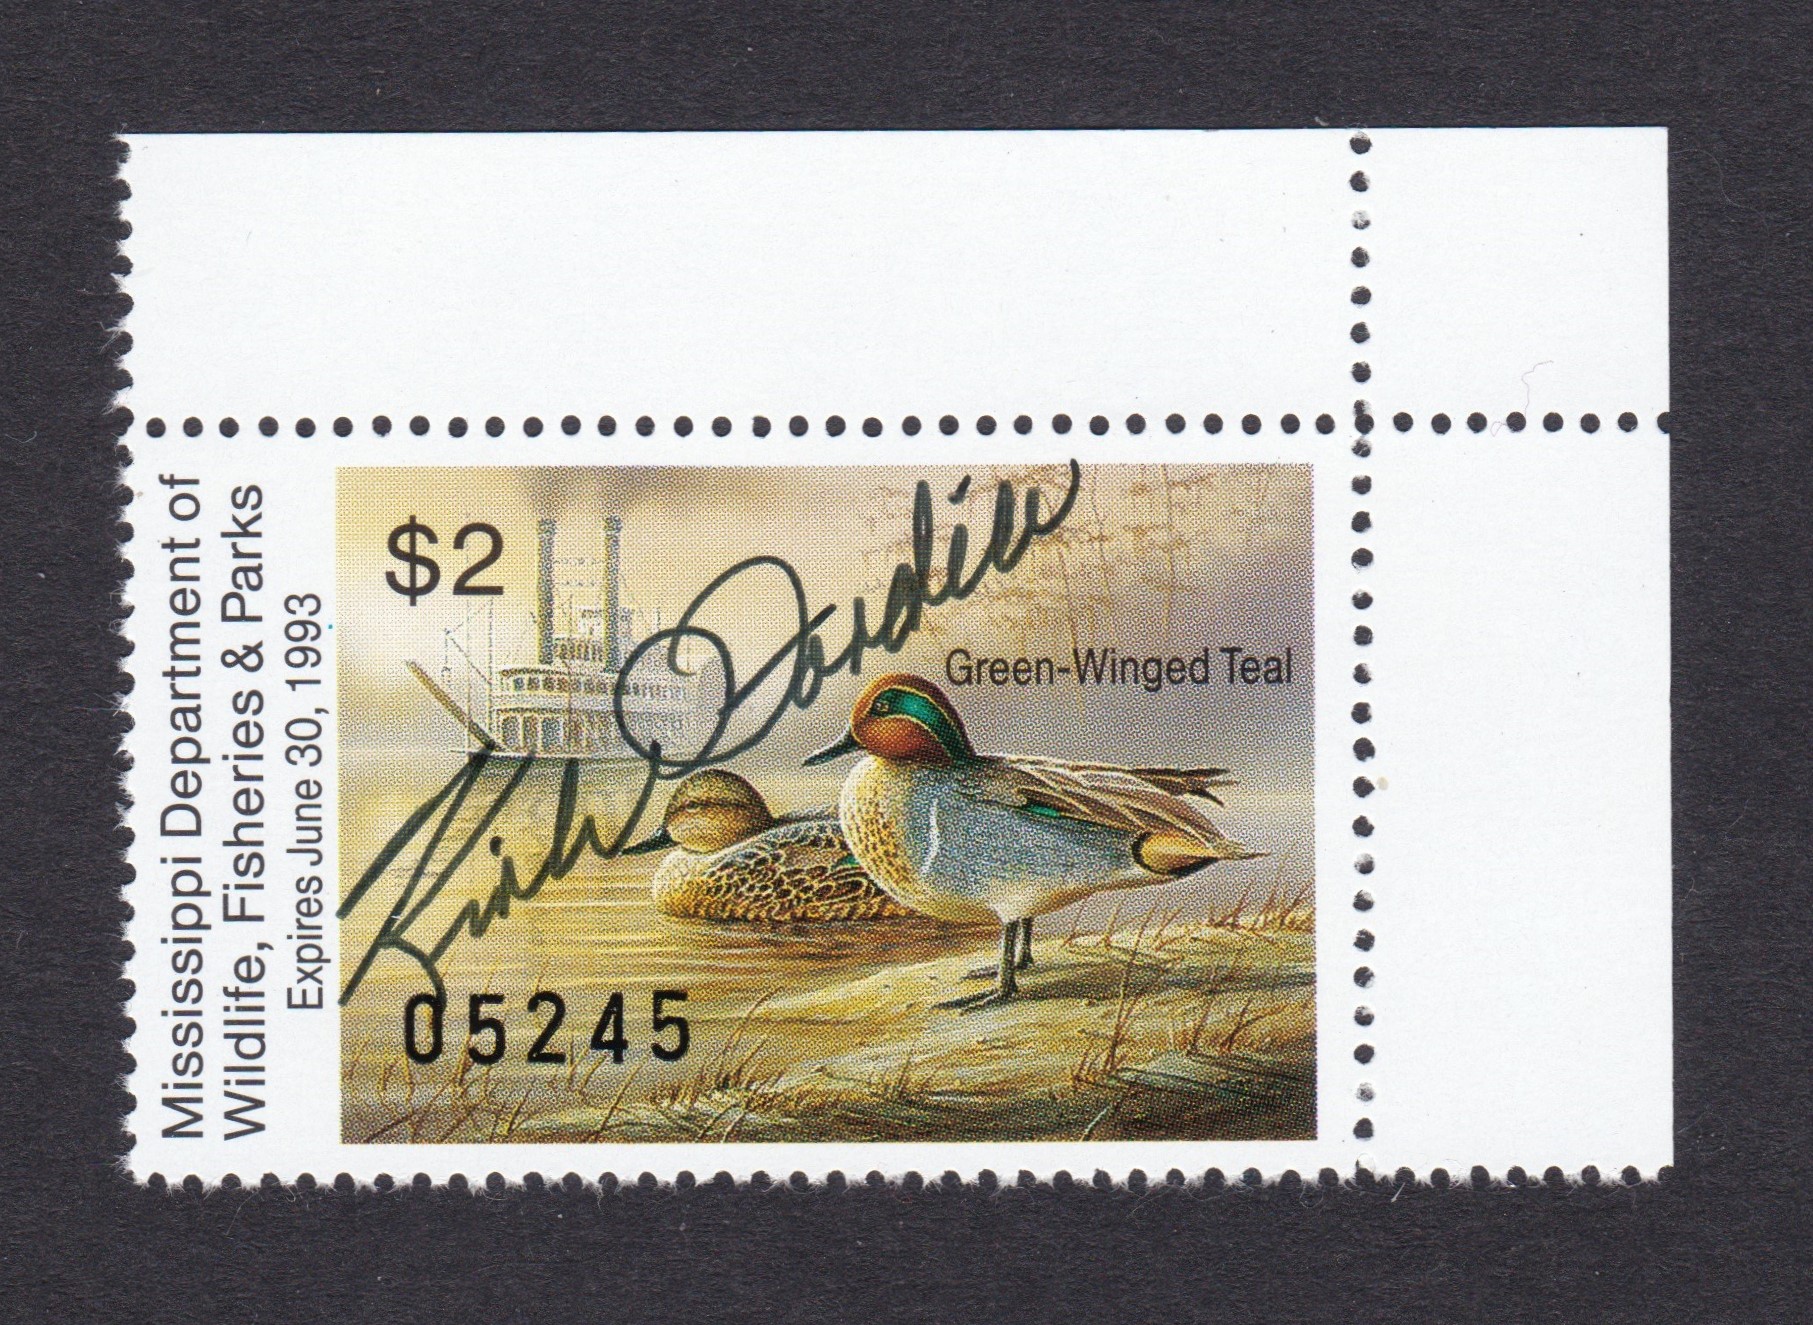 MS waterfowl W17GS $2 NH VF, 1992 Governor's Edition, hand signed by Kirk Fordice (deceased) P